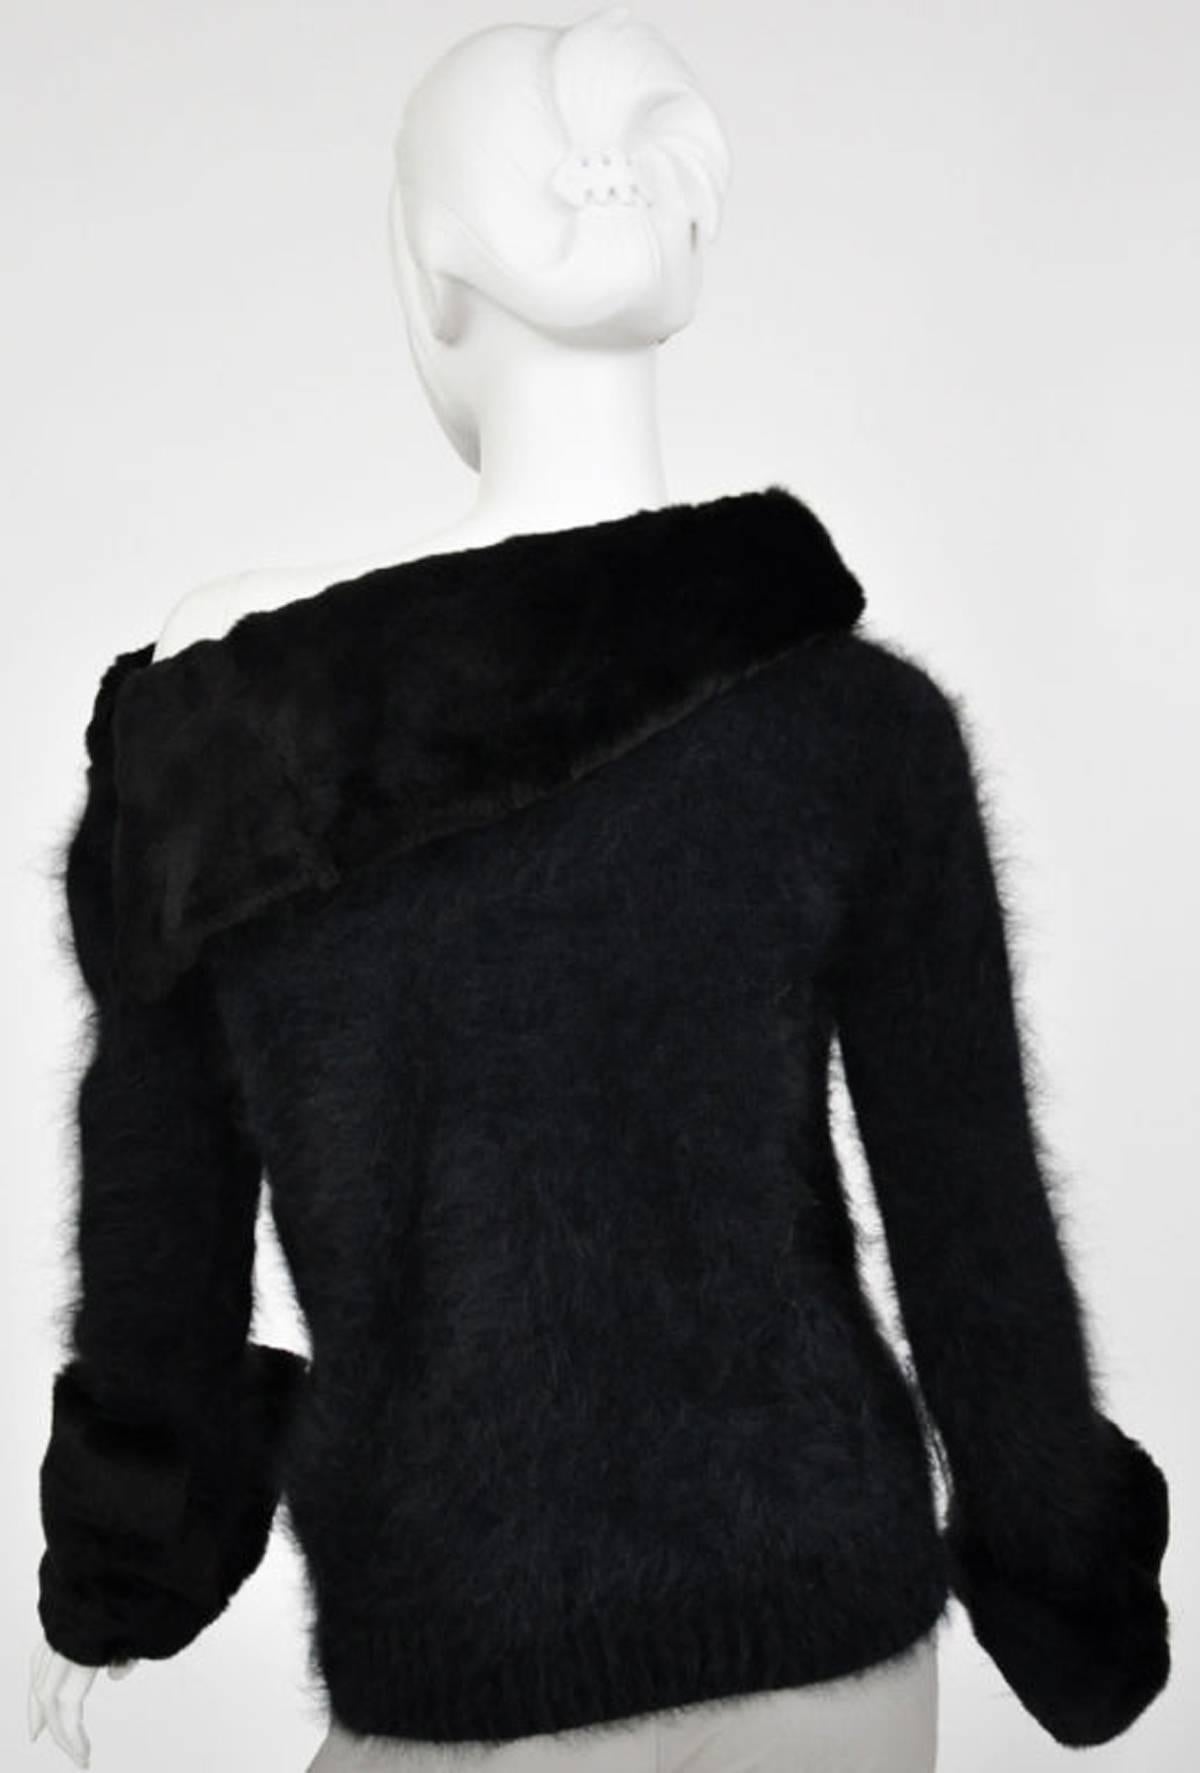 Tom Ford for Gucci 2001 Collection Black Angora and Mink Fur Luxurious Sweater M In Excellent Condition For Sale In Montgomery, TX